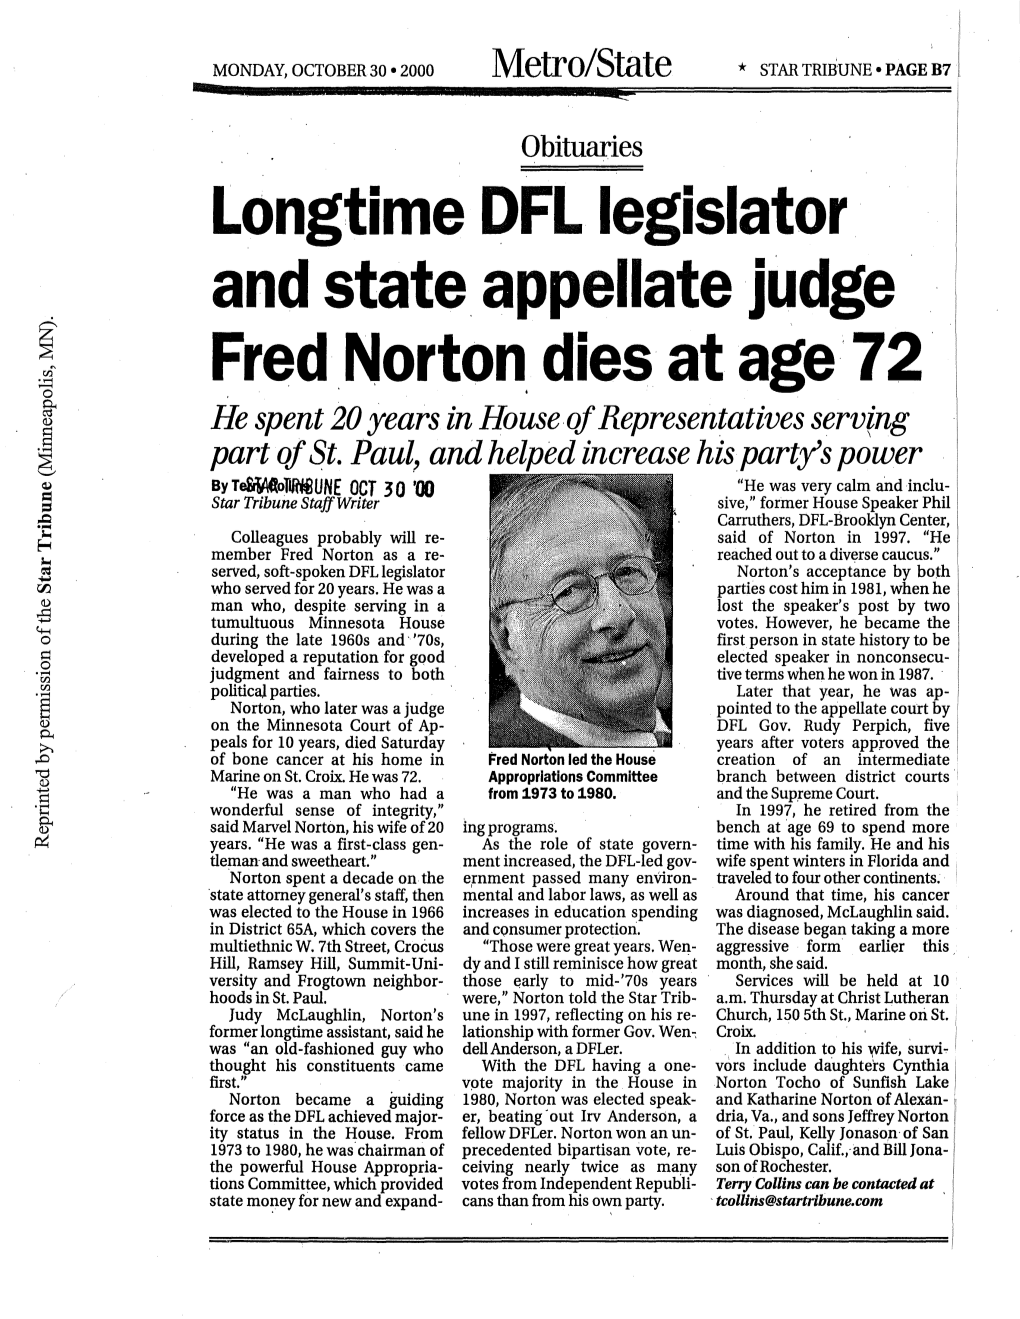 Longtime OFL Legislator and State Appellate Judge Fred,Norton,Dies At